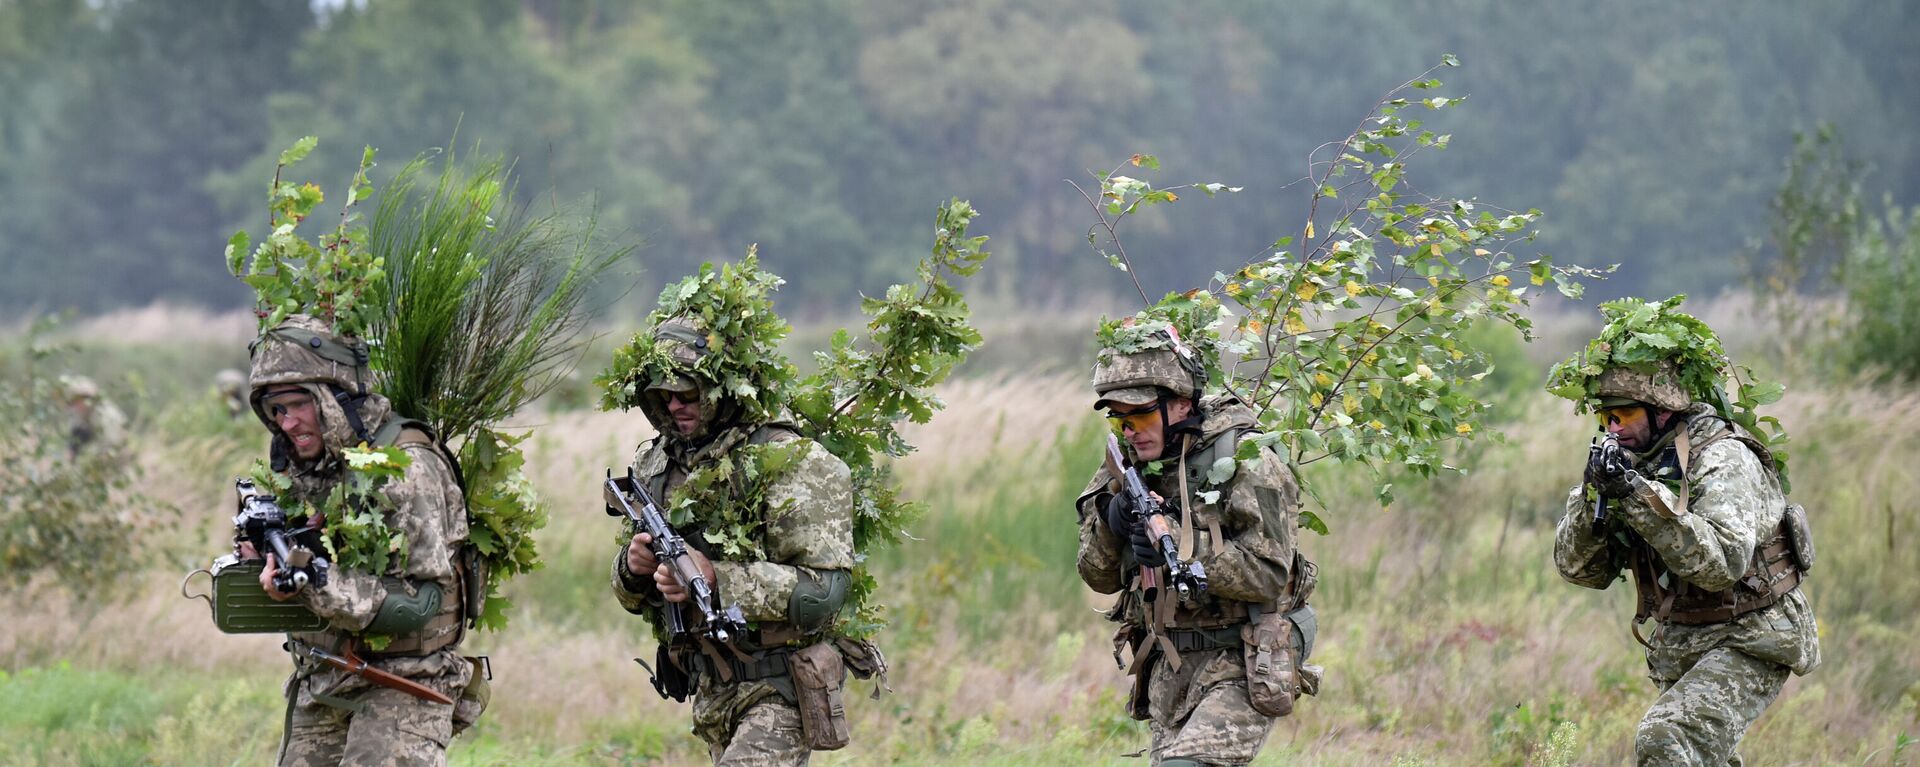 Soldiers take part in an exercise at the Yavoriv military training ground, close to Lvov, Western Ukraine, Friday, Sept 24, 2021. Ukraine, the US, and other NATO countries continue joint military drills in Western Ukraine presenting offensive exercises in town-like surroundings with tanks and other military vehicles involved.  - Sputnik International, 1920, 16.03.2022